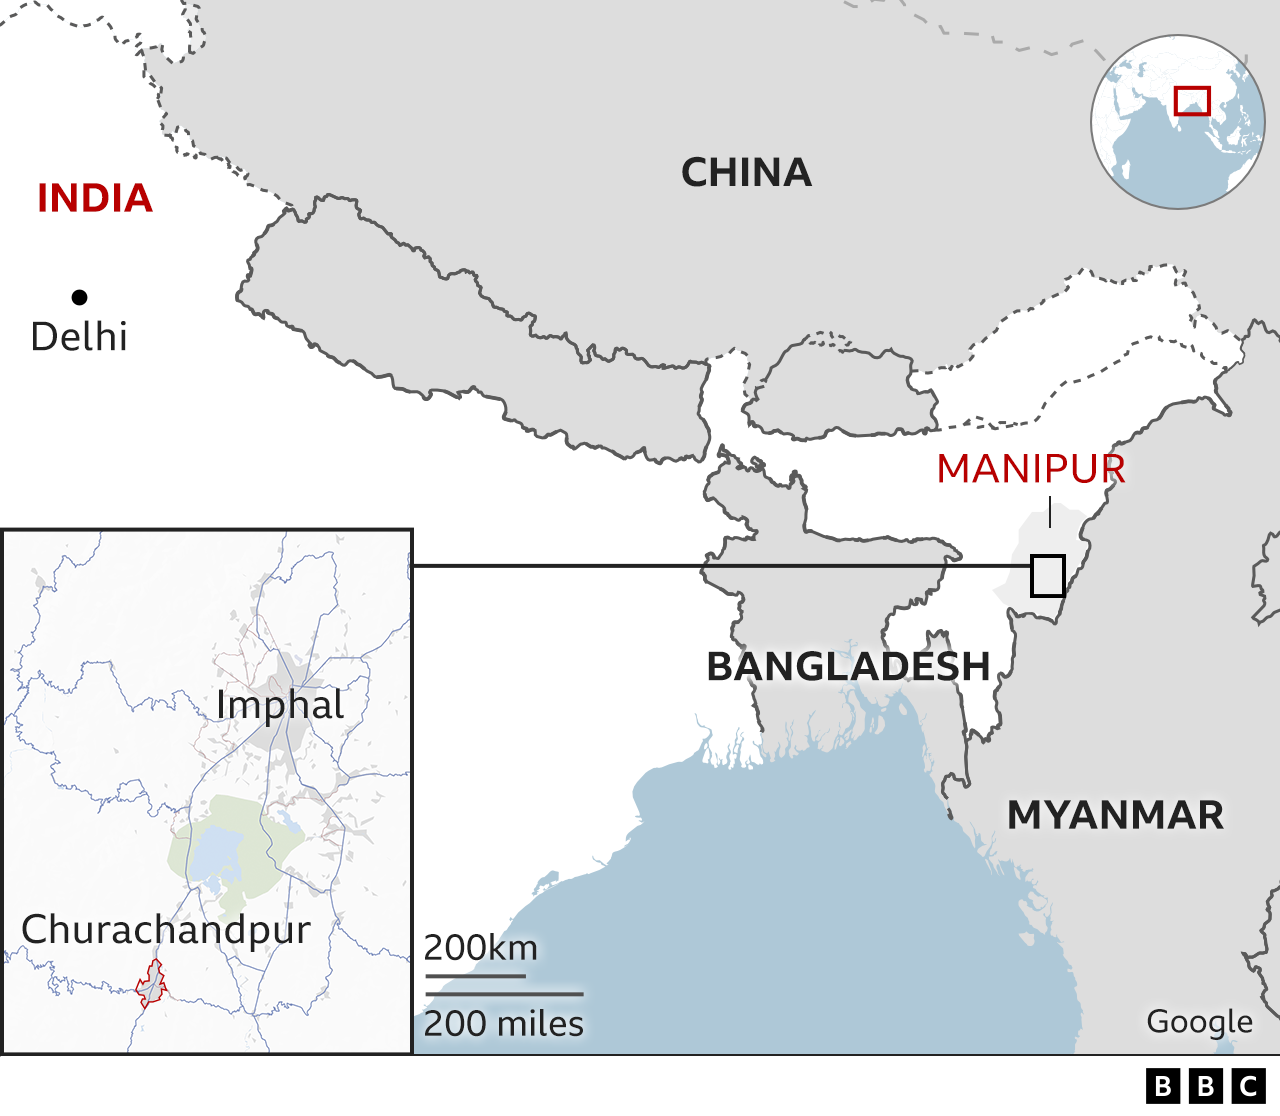 A map shows the location of the city of Imphal and the area of Churachandpur in Manipur